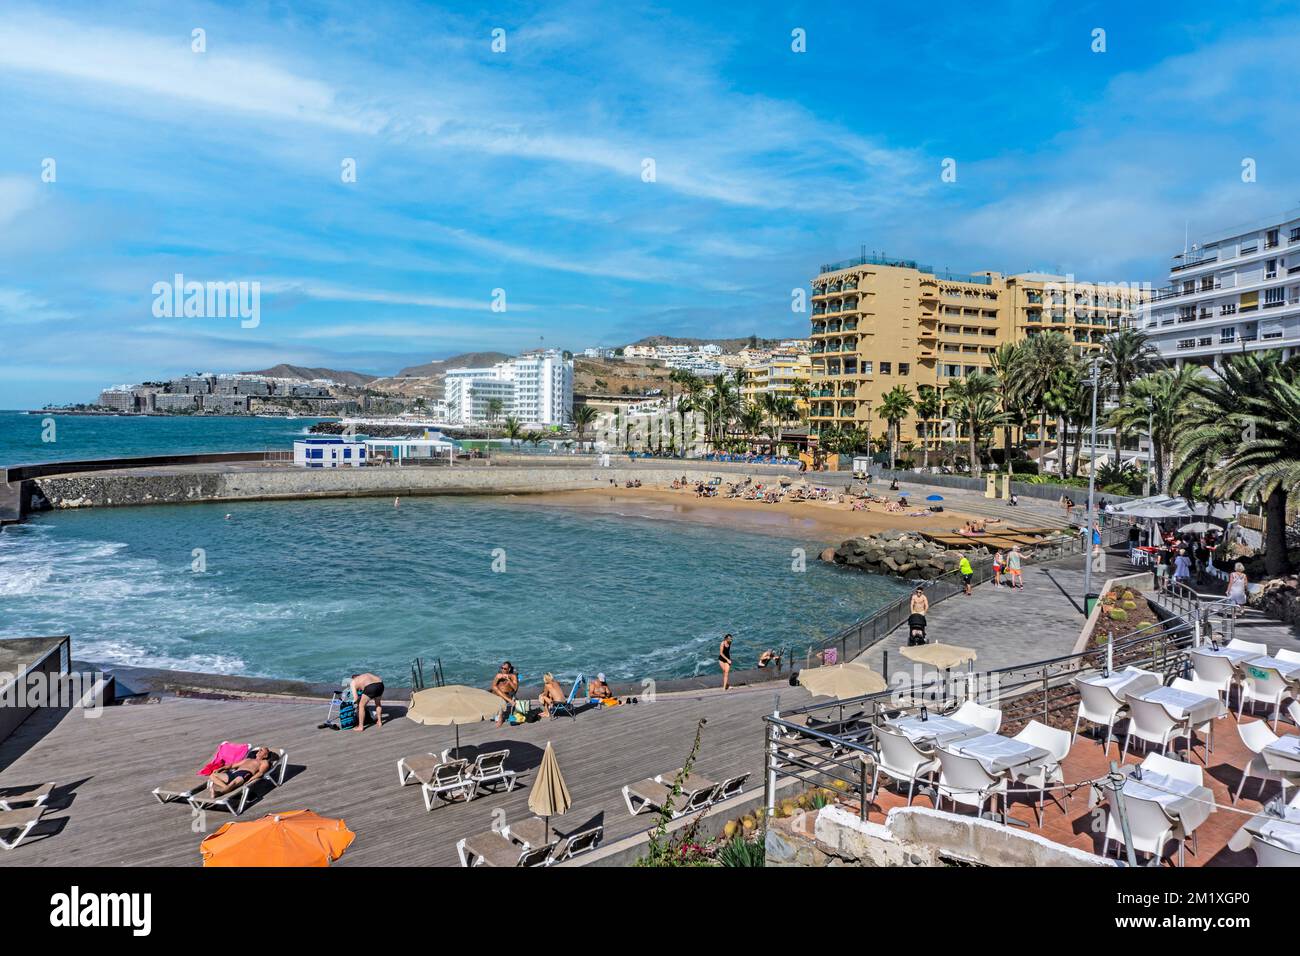 Arguineguin, Gran Canaria, withs its coastal walkway and a place to soak up the sun Stock Photo